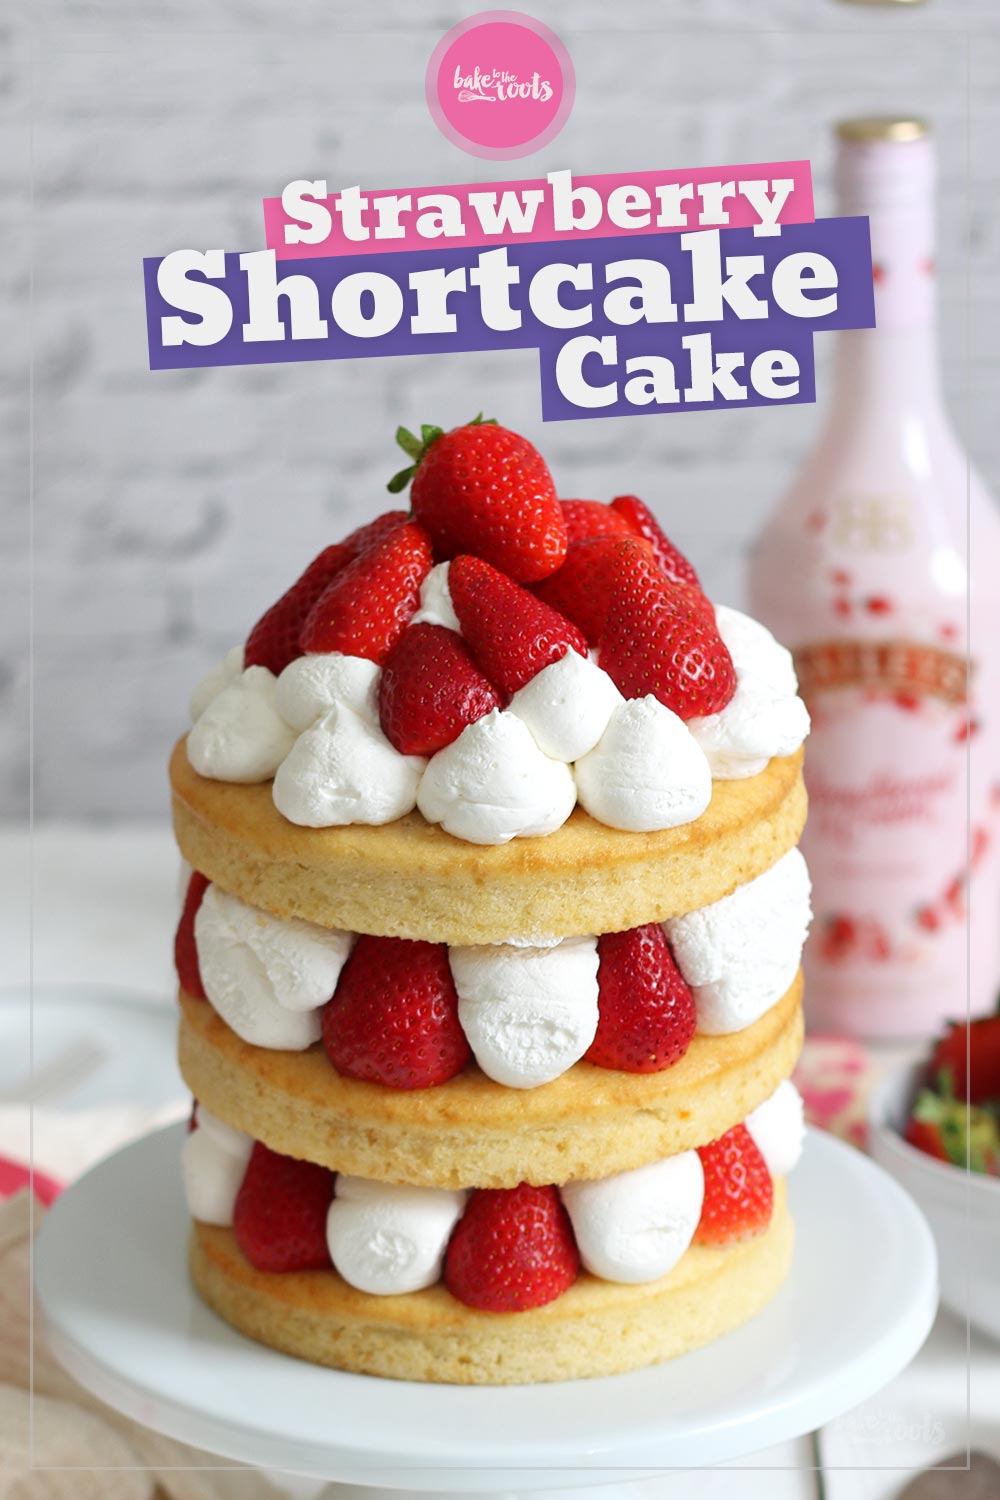 Strawberry Shortcake Cake | Bake to the roots